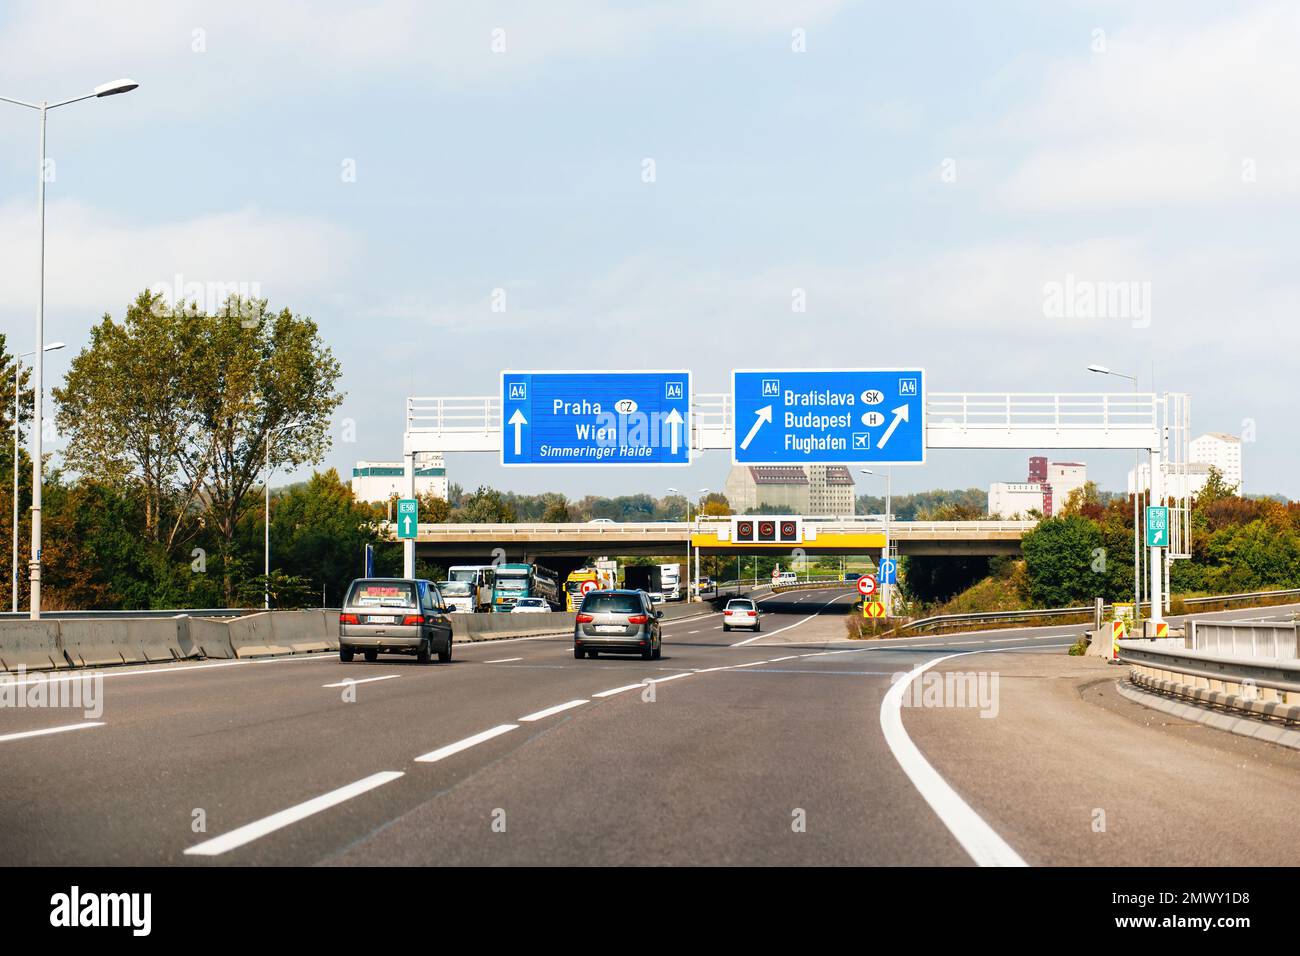 Austria - Sep 30, 2014: View from the highway at the blue direction signs above with Praha, Wien, Simmeringer haide, Bratislava, Budapest and Airport Flughafen A4 - driving in Austria near the border Stock Photo